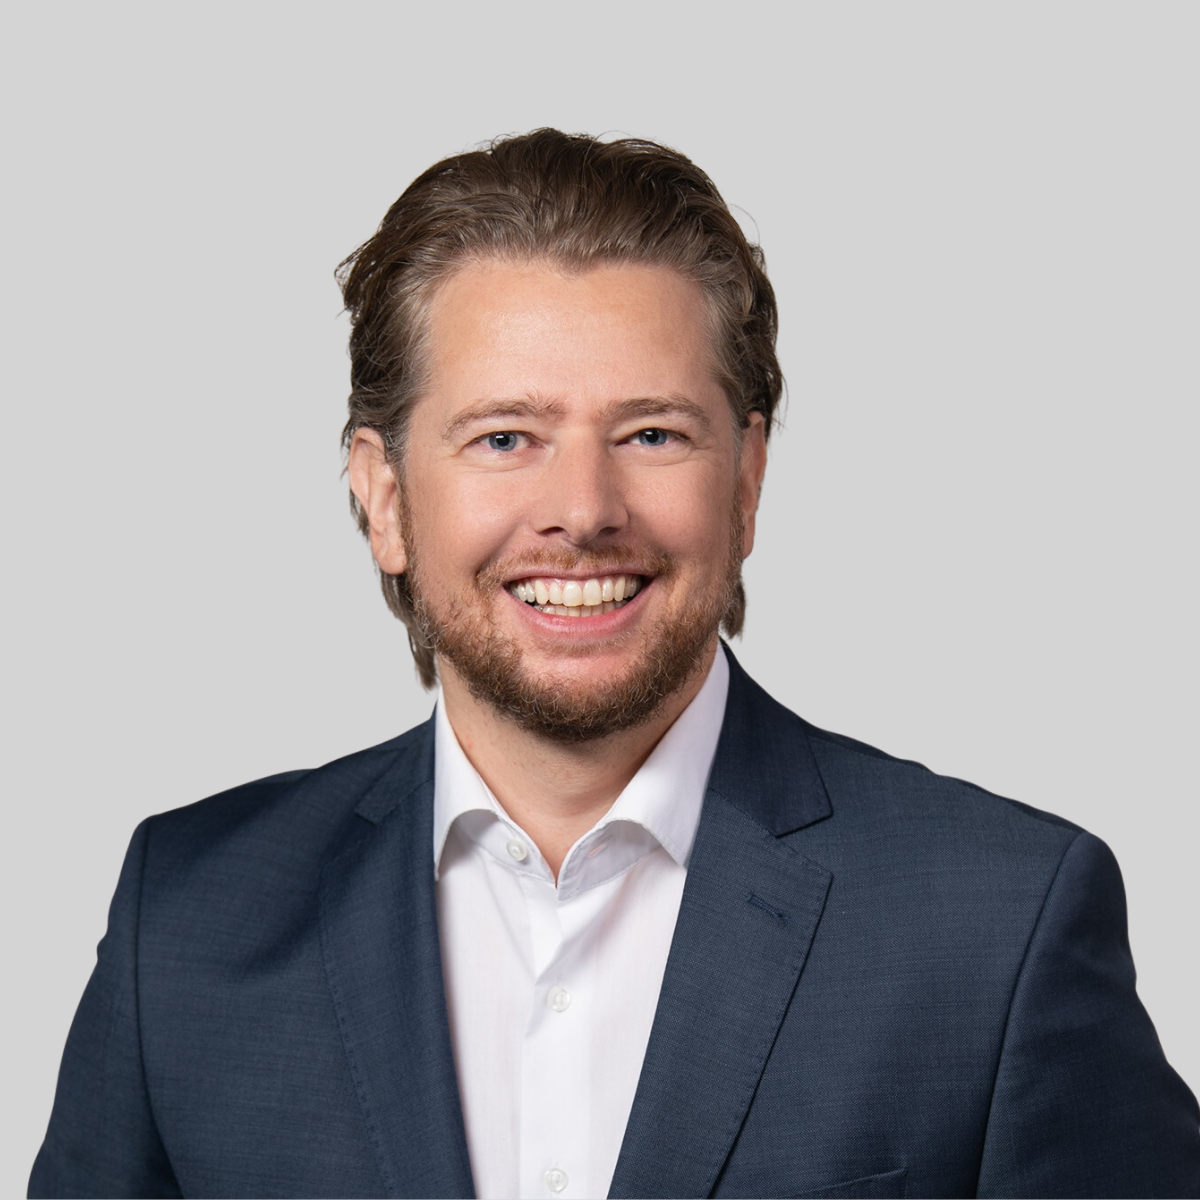 Christian Dulle, Primas CONSULTING GmbH